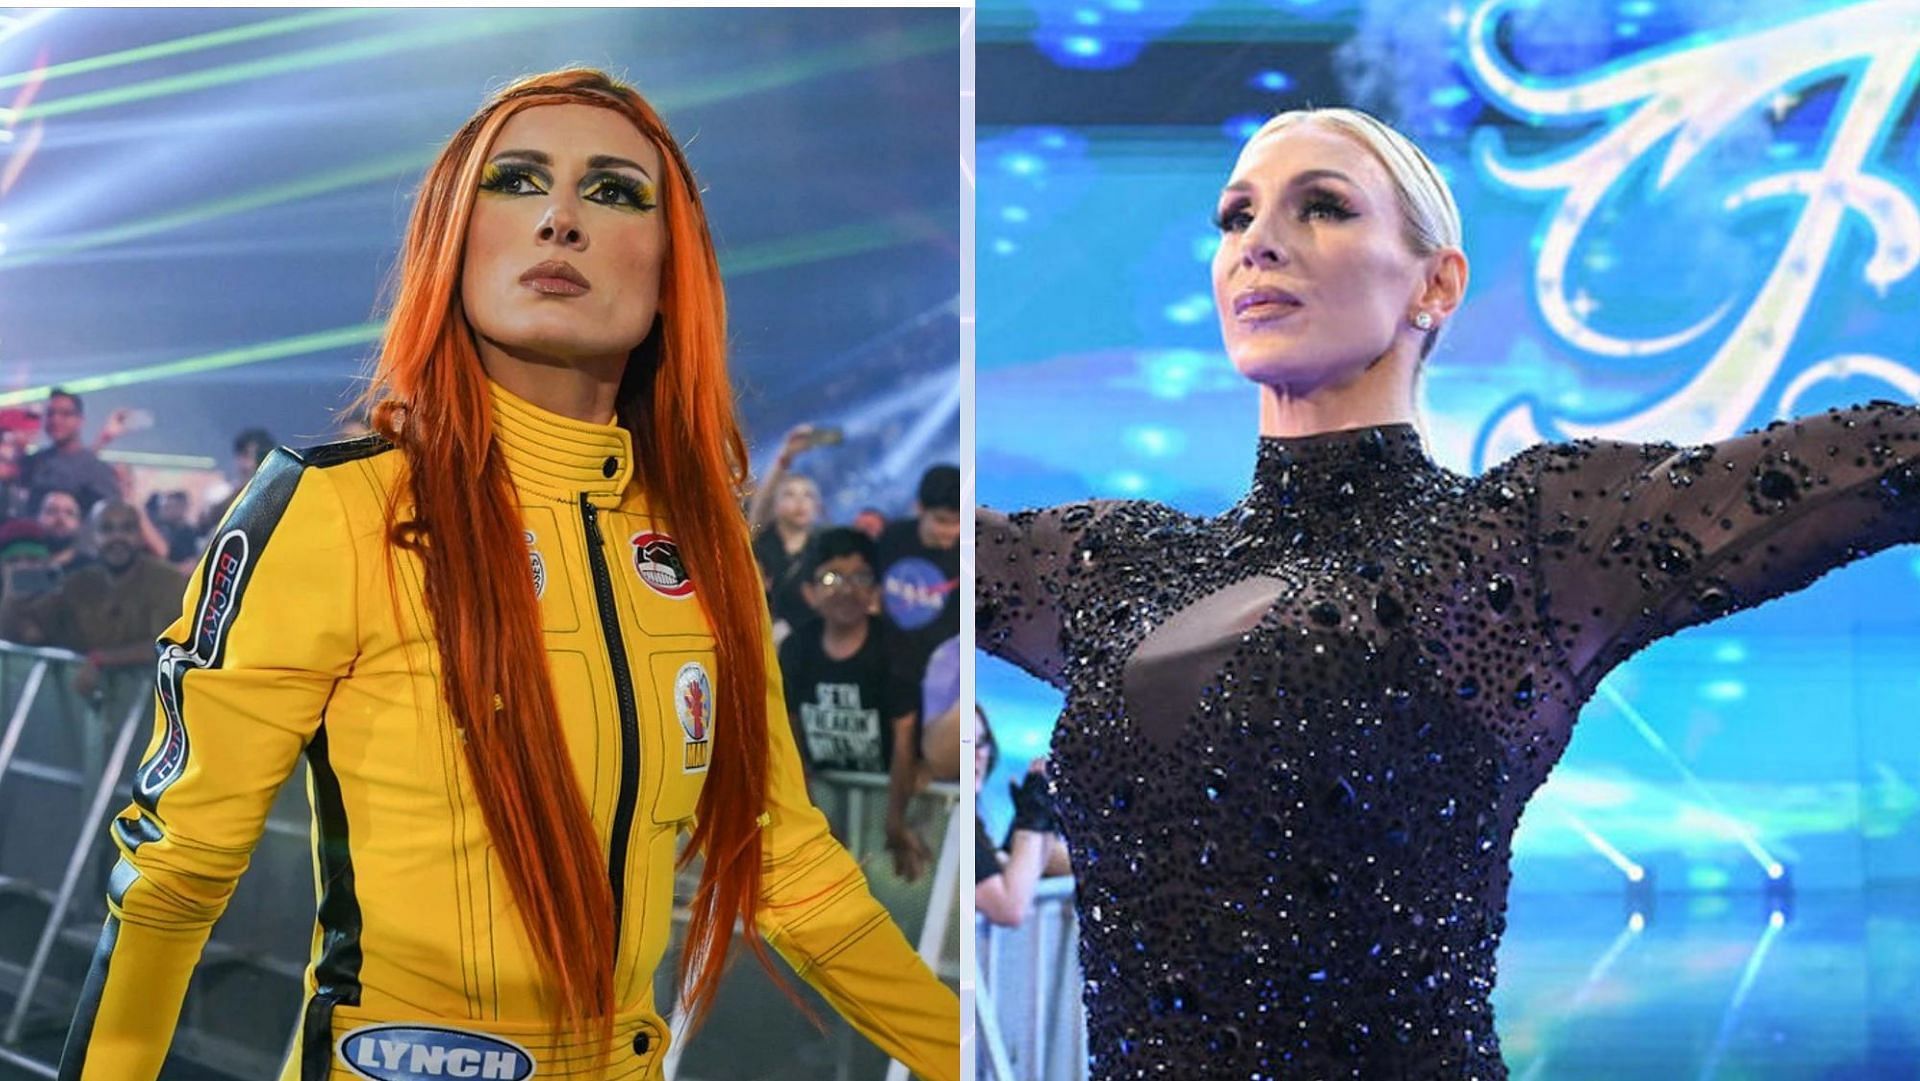 Becky Lynch and Charlotte Flair are drafted to different brands in WWE.